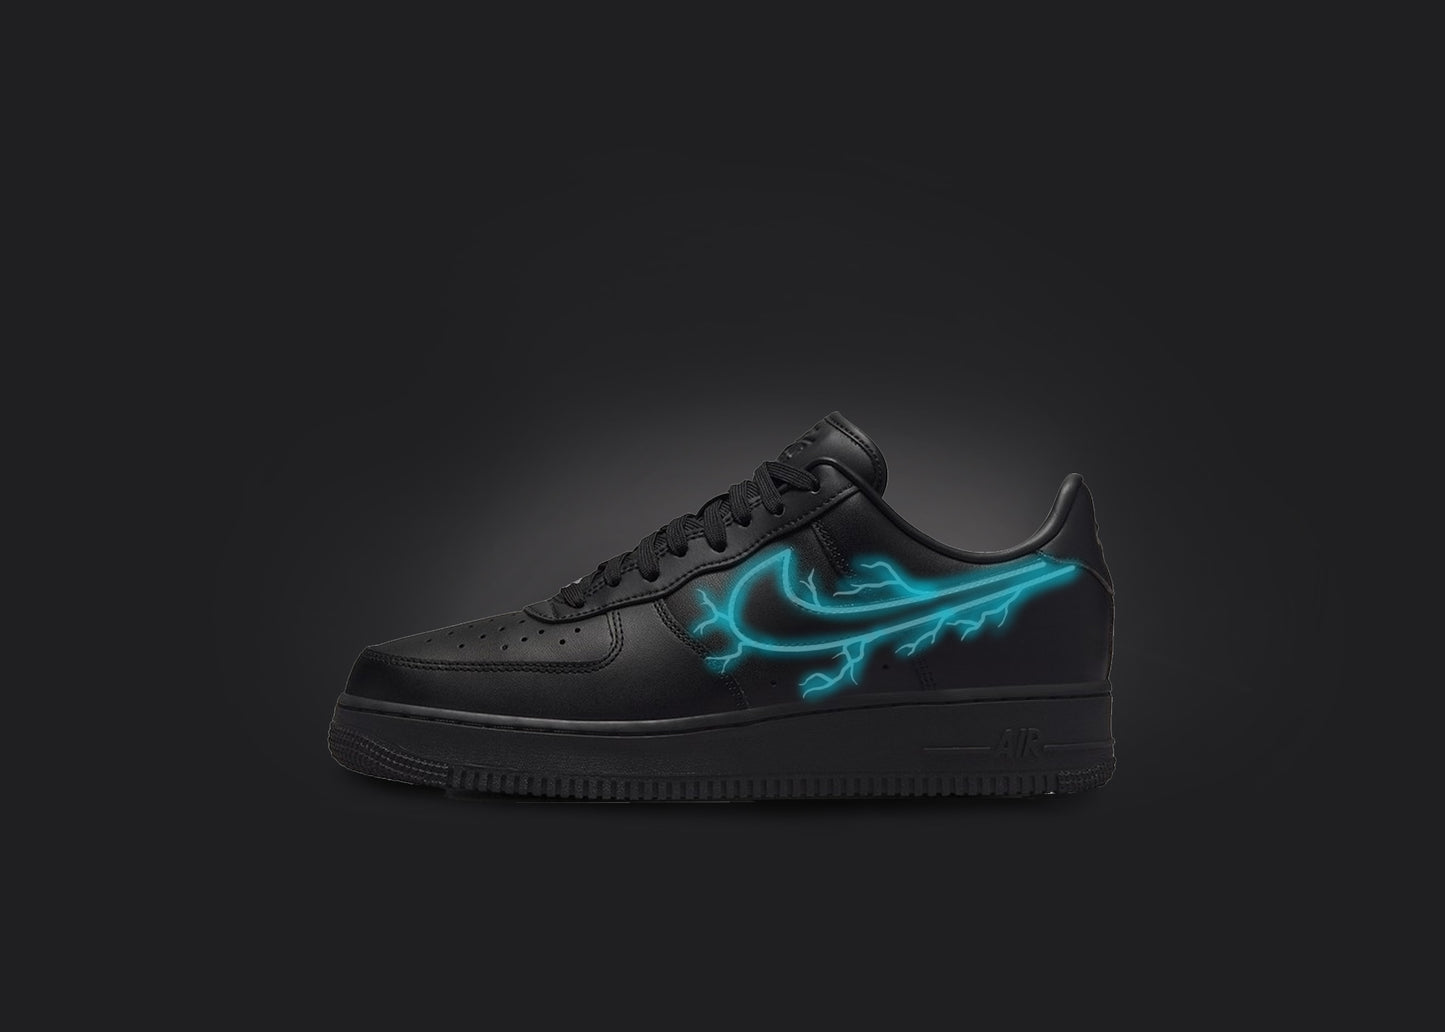 The image is featuring a custom black Air force 1 sneaker on a blank black background. The black nike sneaker has a blue lightning design on the nike logo. 